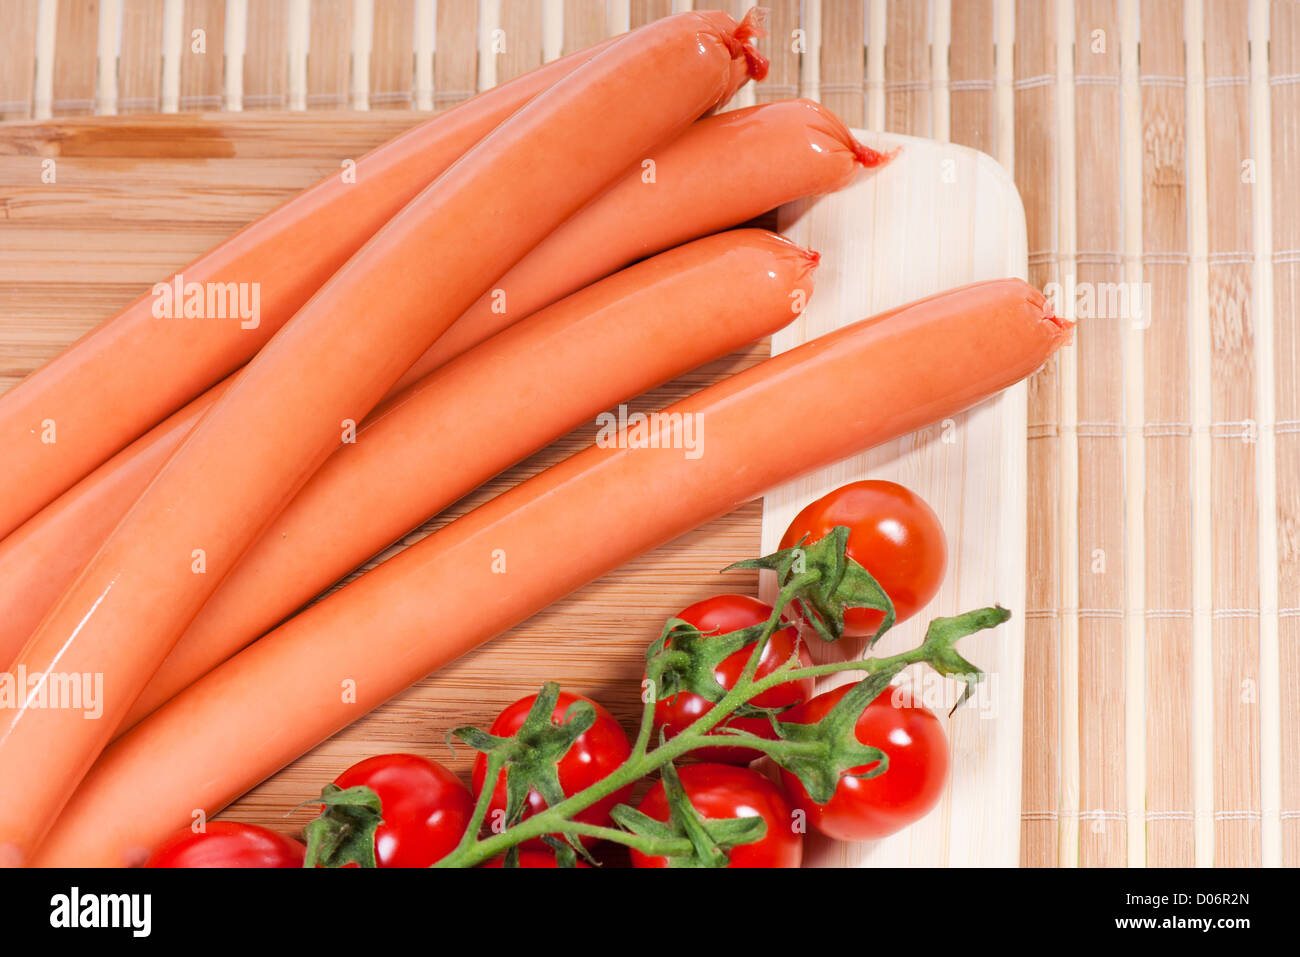 Smoked frankfurters bunch with red cherry tomato Stock Photo